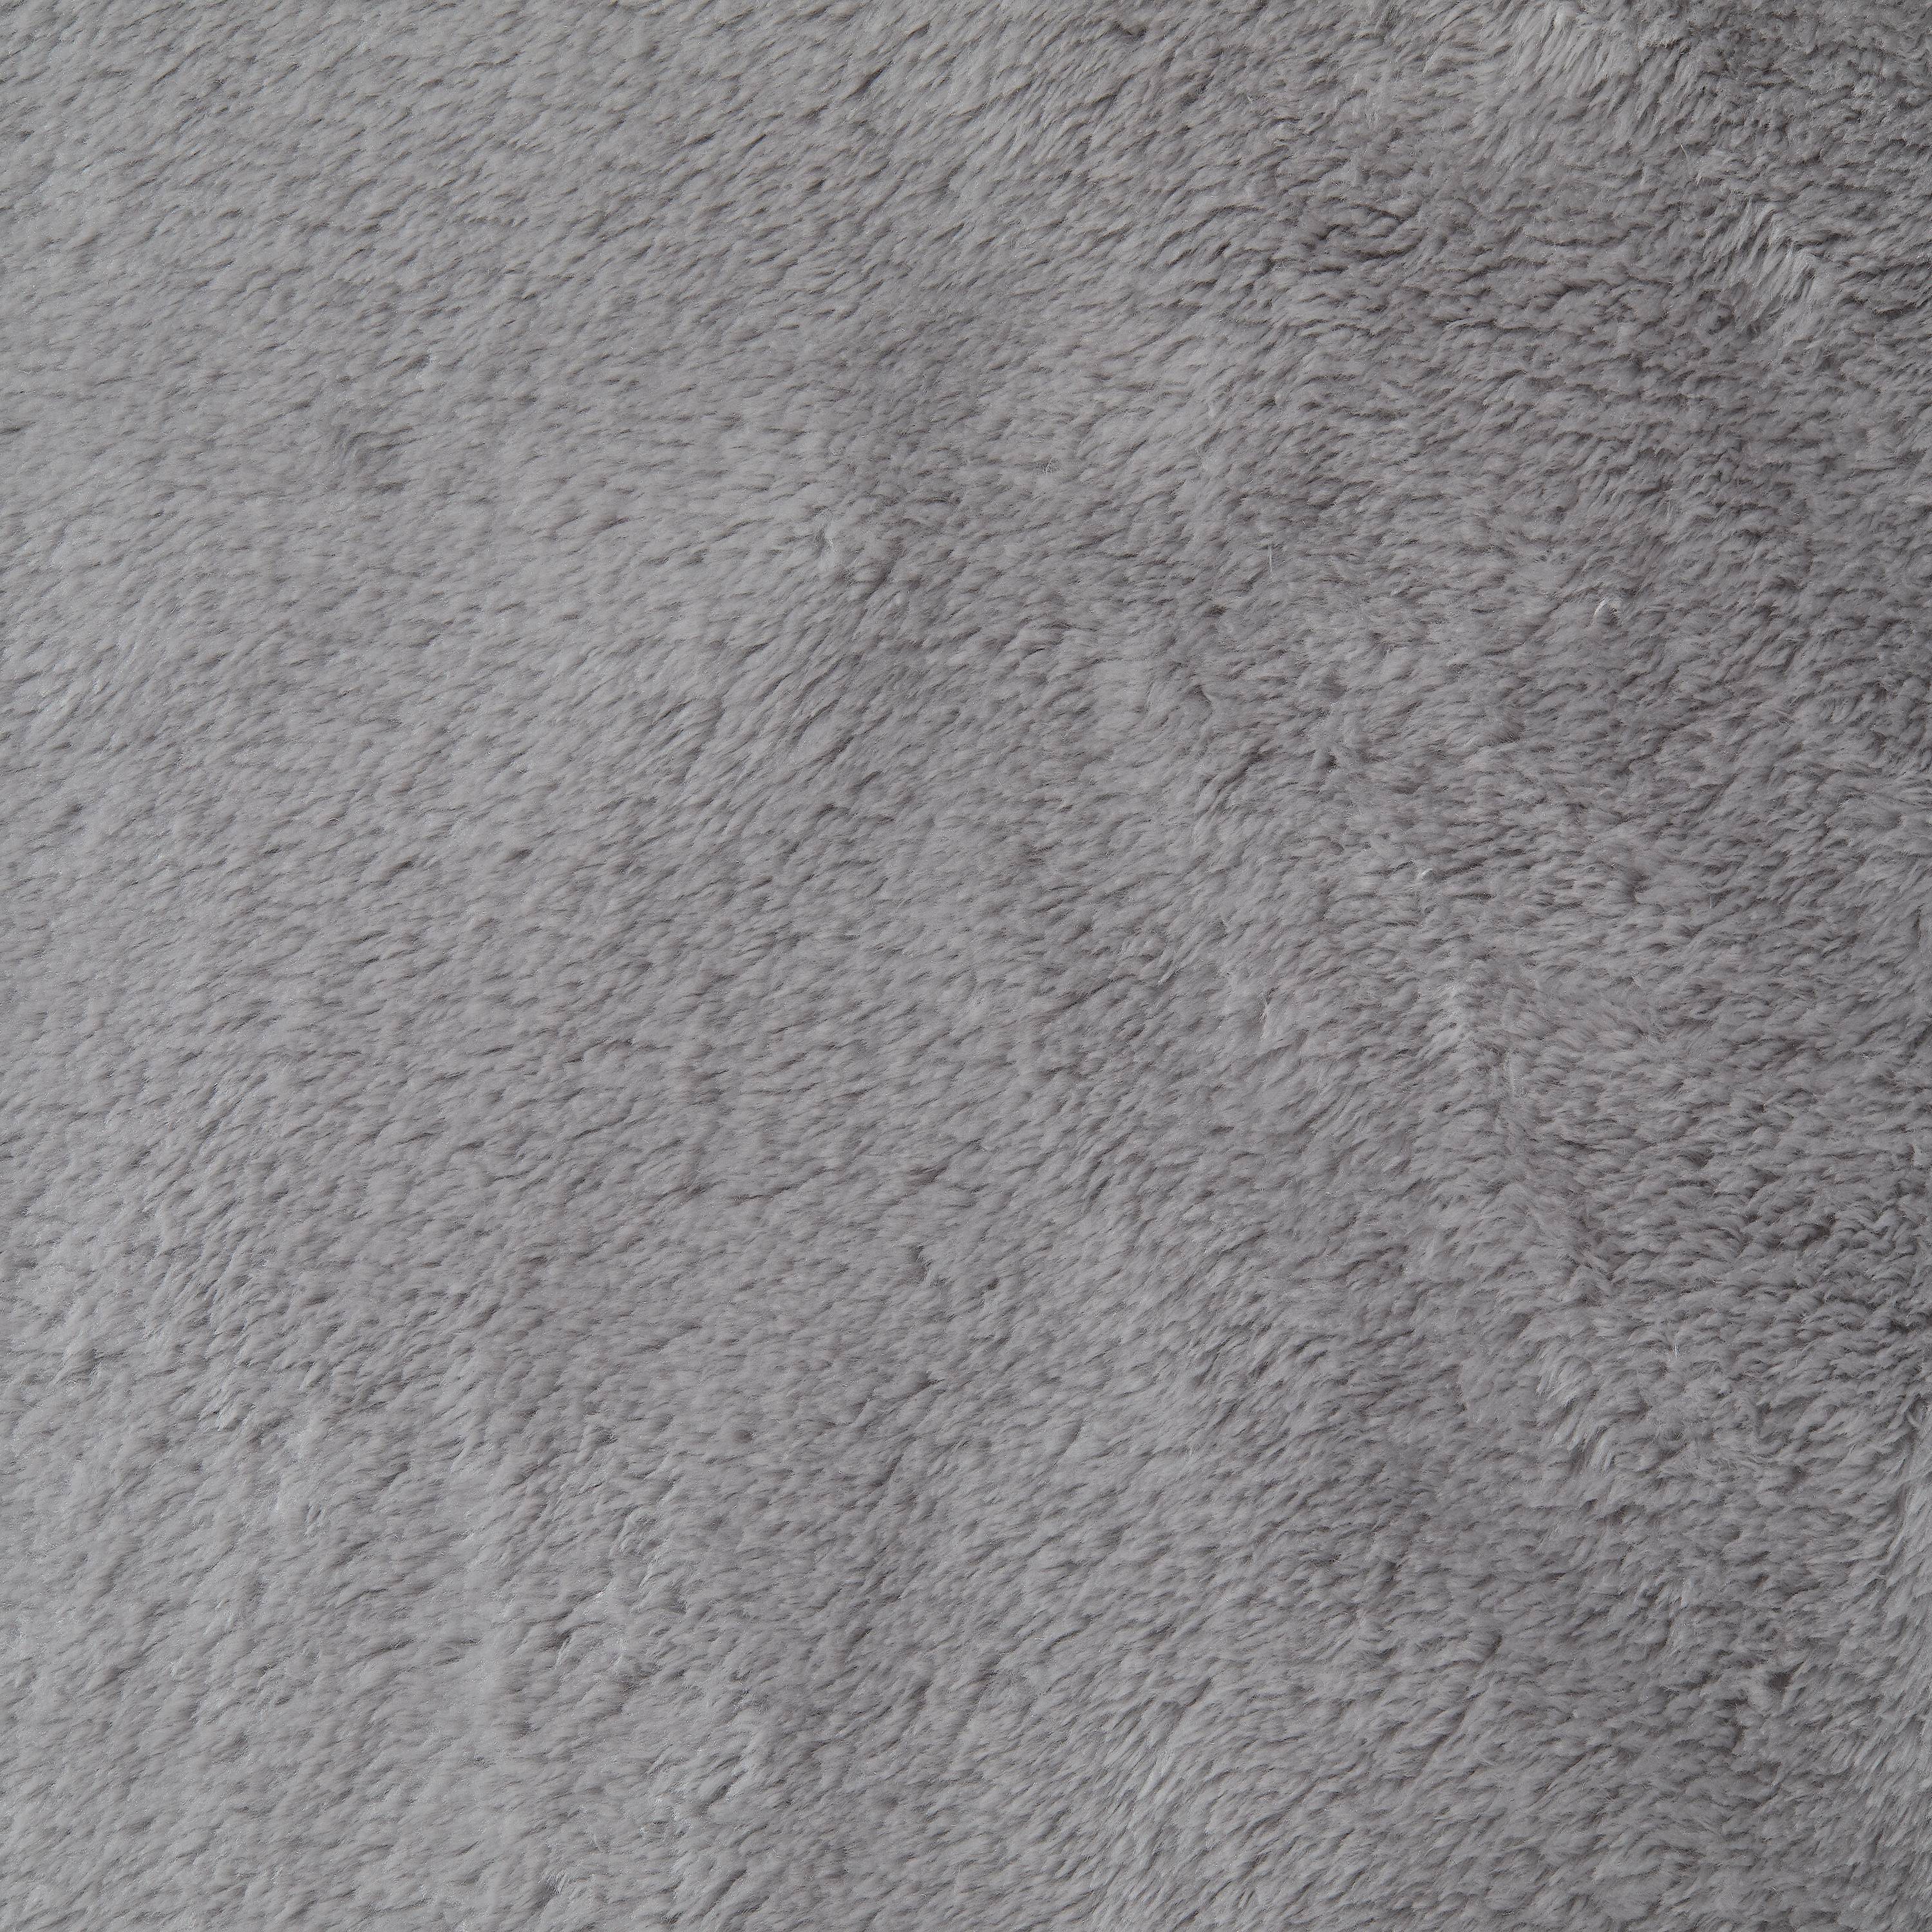 Better Homes & Gardens Luxe Plush Blanket, Full/Queen Soft Silver - image 3 of 4